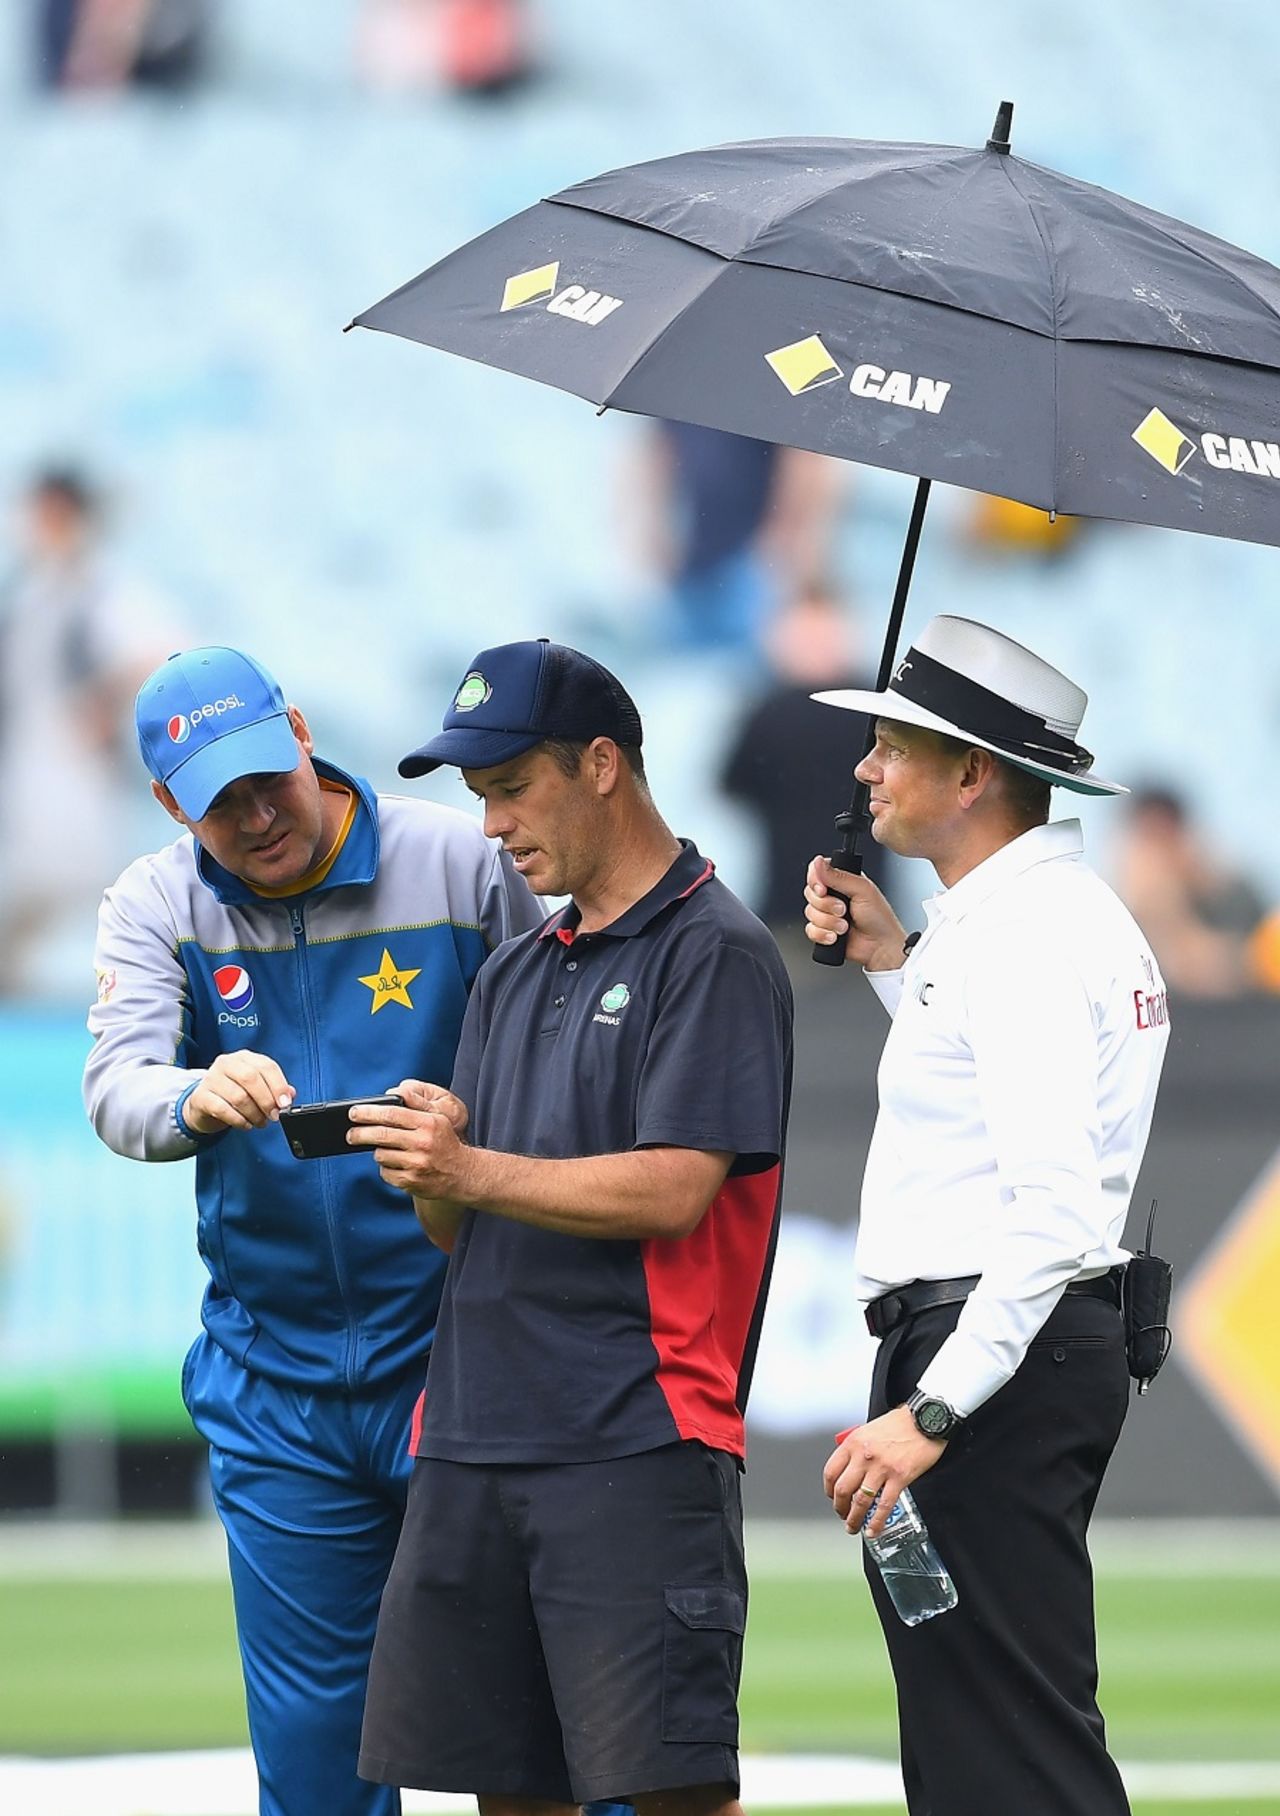 Mickey Arthur checks in with the groundstaff and umpires, Australia v Pakistan, 2nd Test, 2nd day, Melbourne, December 27, 2016